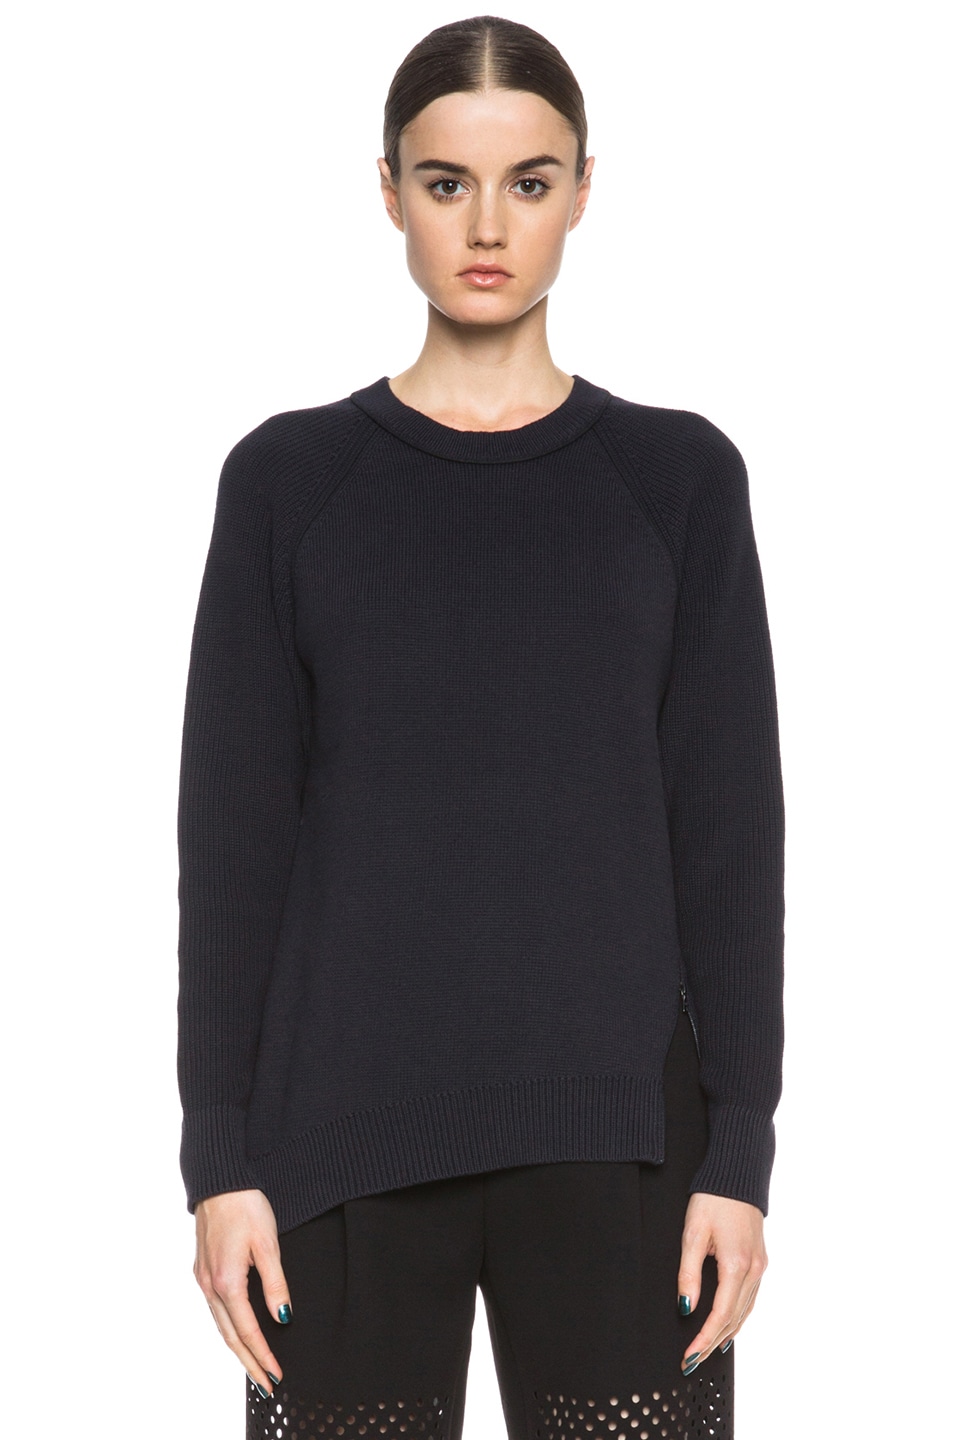 Image 1 of 3.1 phillip lim Knit Crewneck Sweater with Piping in Navy